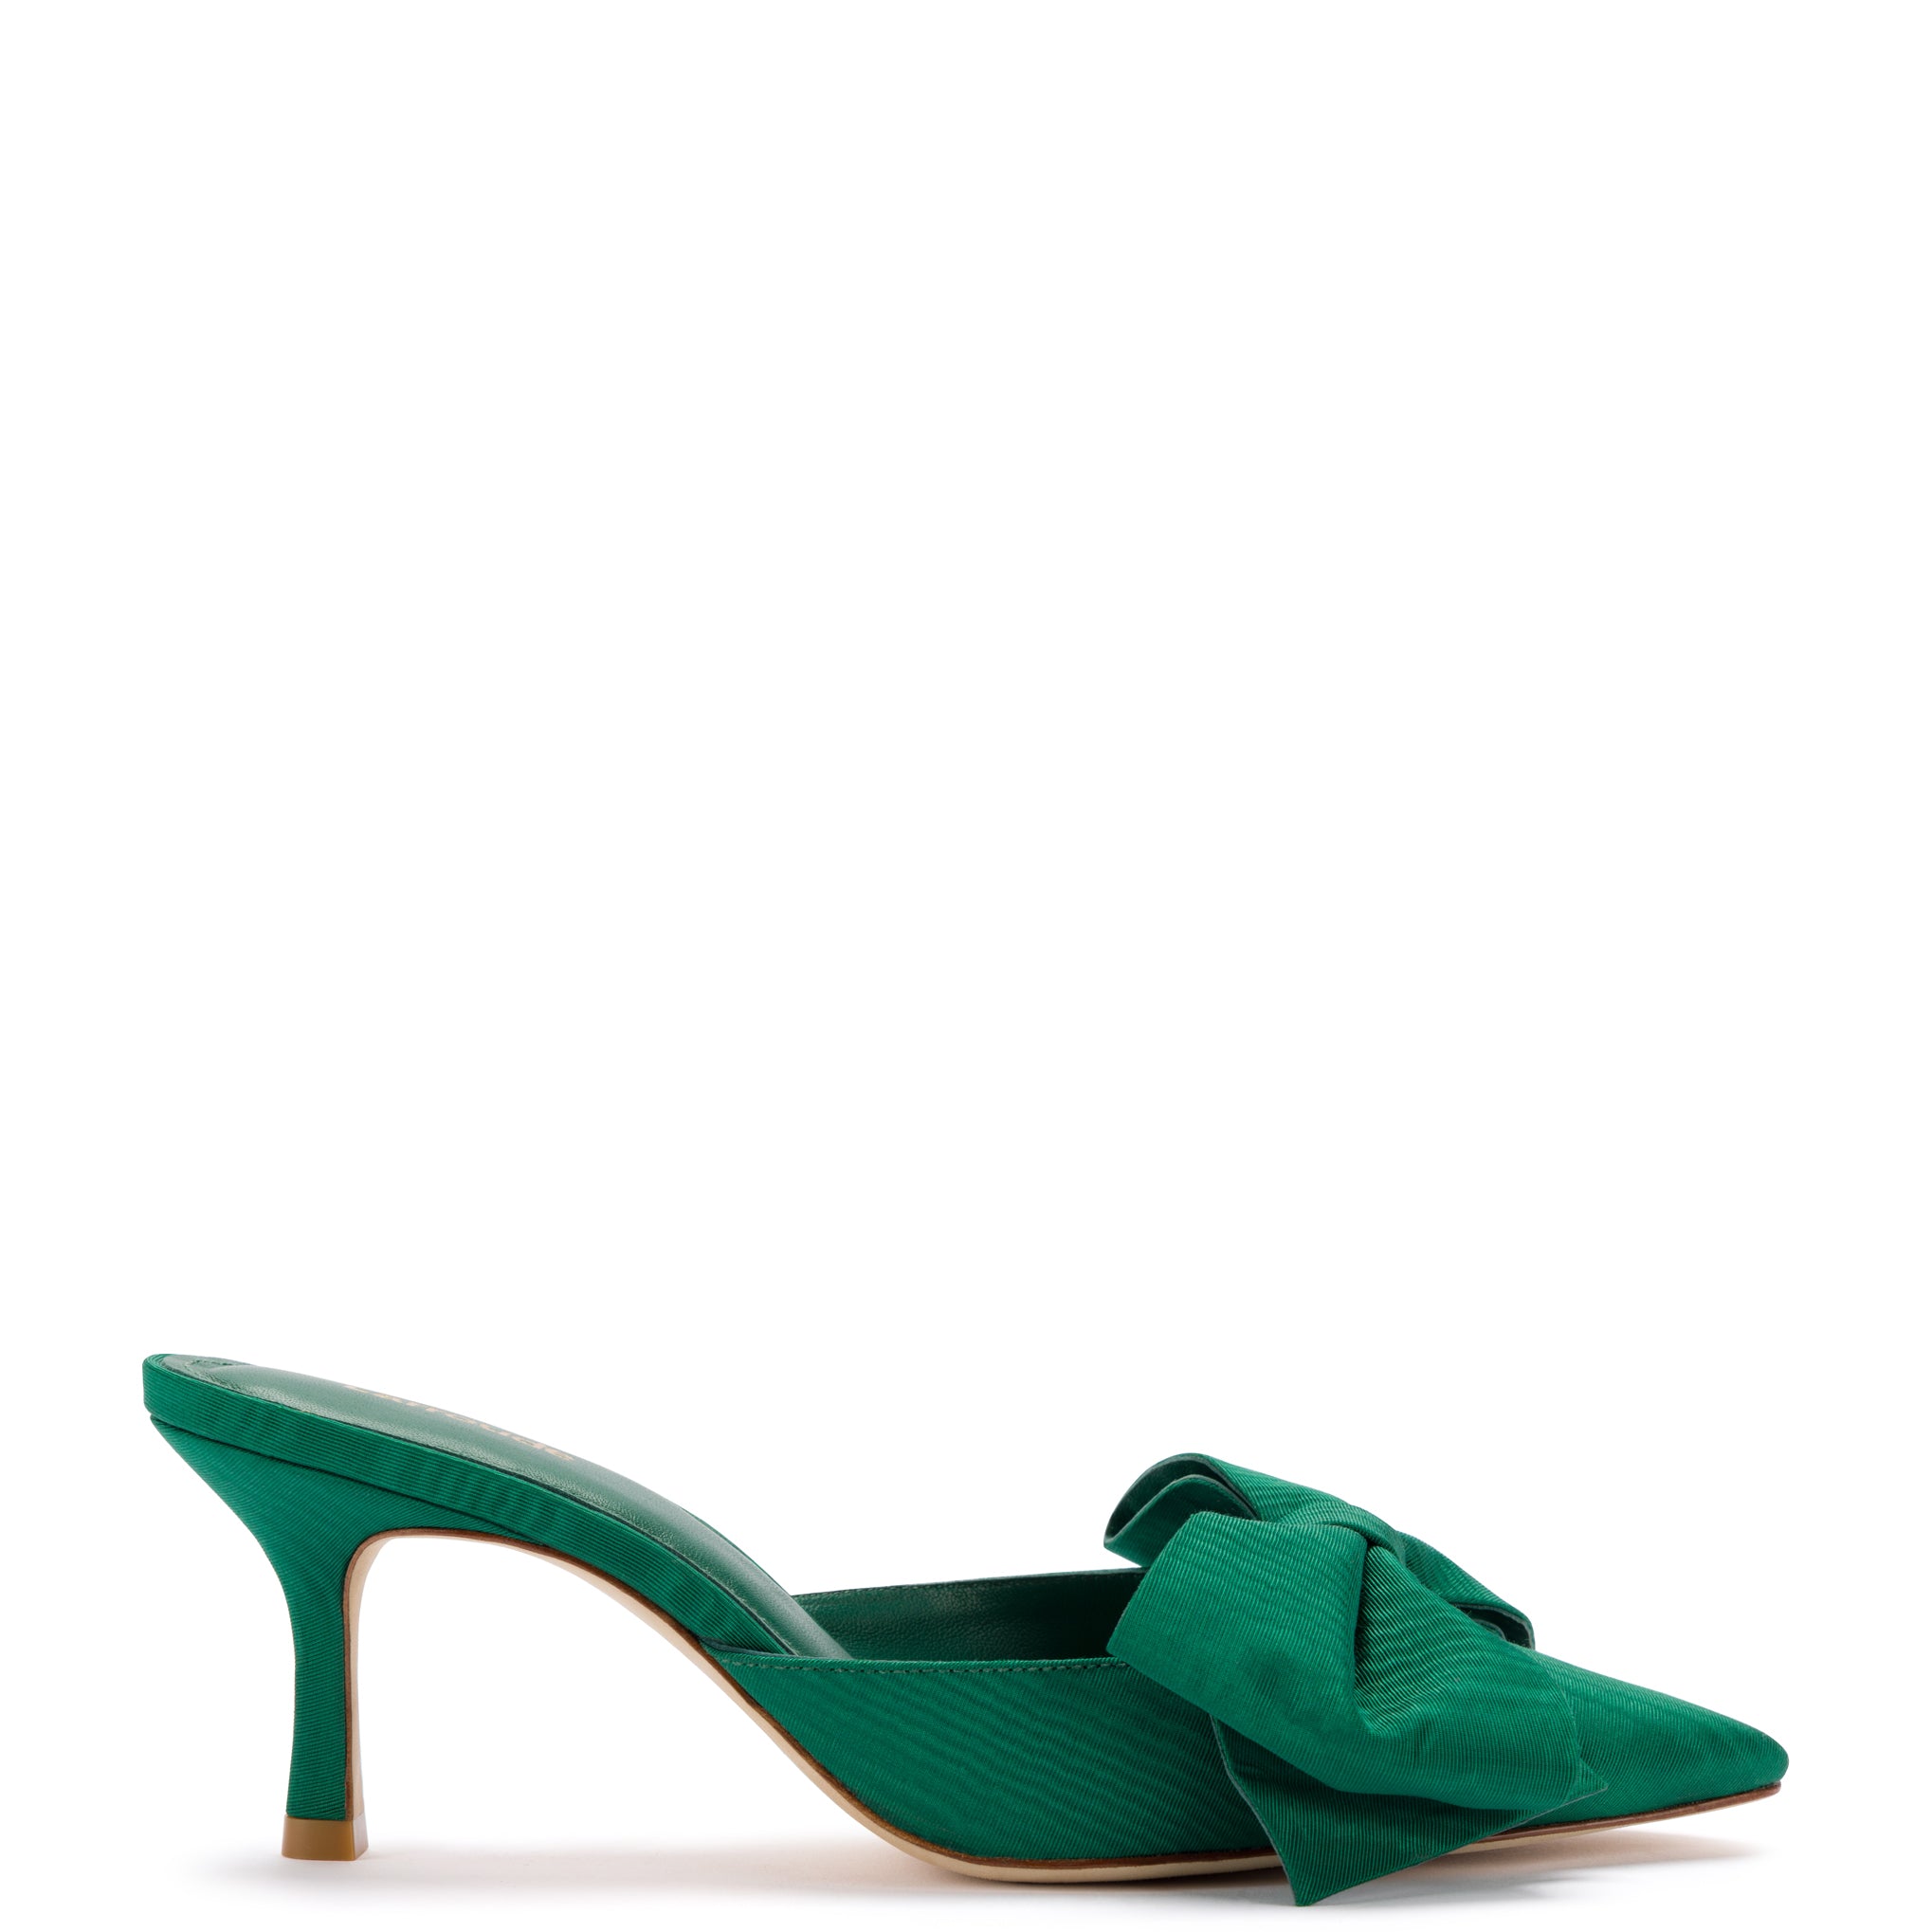 Fashion Green Sandals For Women, Faux Suede Stiletto Heeled Ankle Strap  Sandals for Sale Australia| New Collection Online| SHEIN Australia